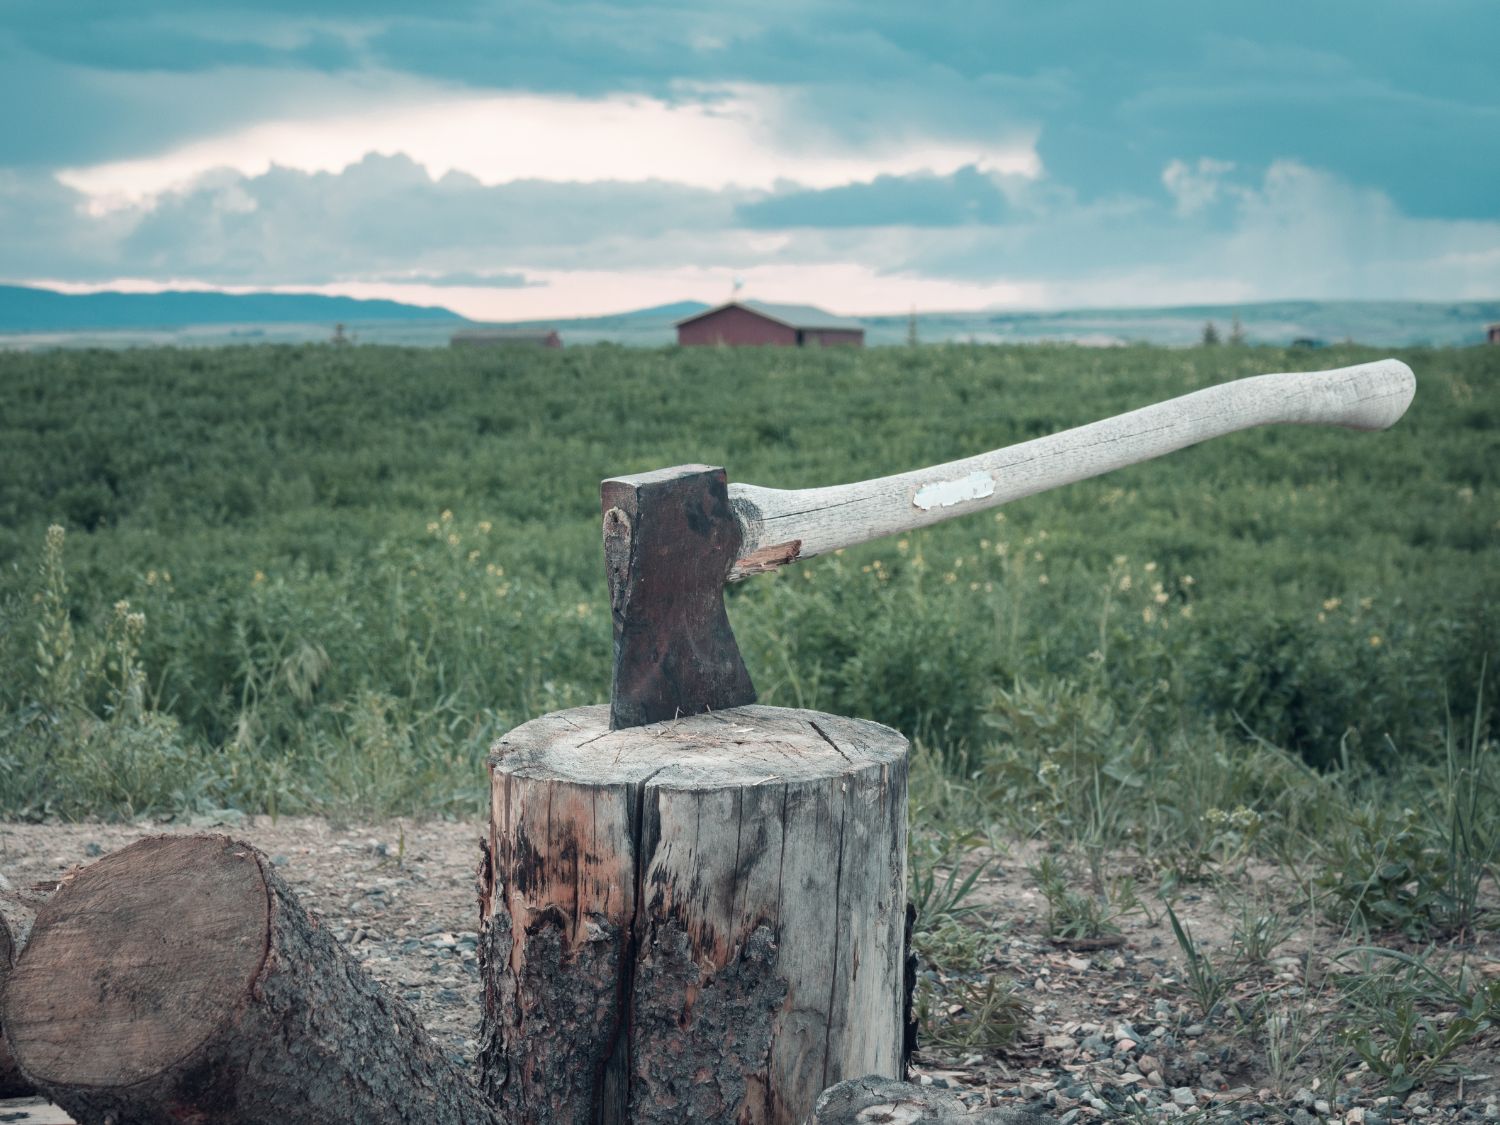 A photo of an axe in a log with a homestead in the background